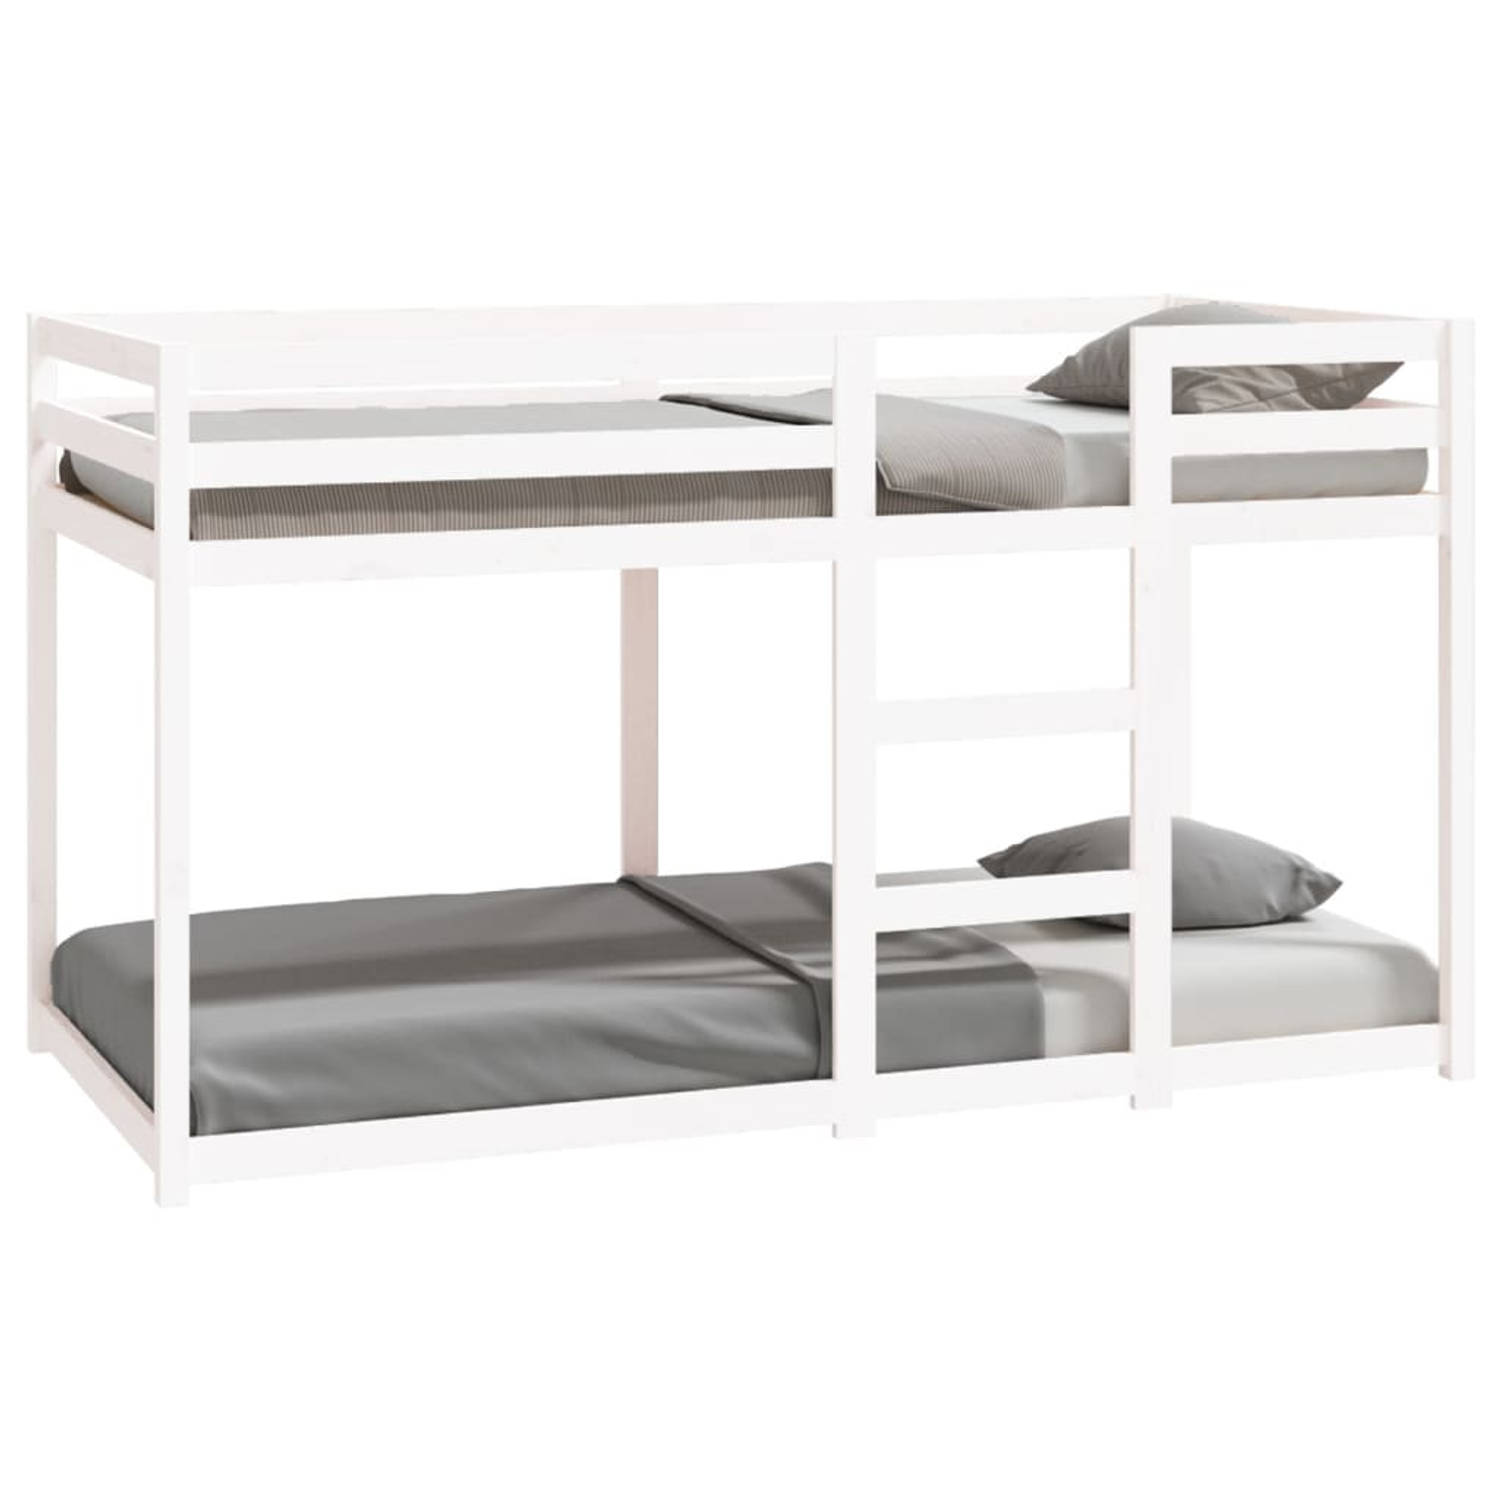 The Living Store Stapelbed 90x190 cm massief grenenhout wit - Stapelbed - Stapelbedden - Bed - Bedframe - Stapelbedframe - Bed Frame - Bedden - Bedframes - Stapelbedframes - Bed Fr